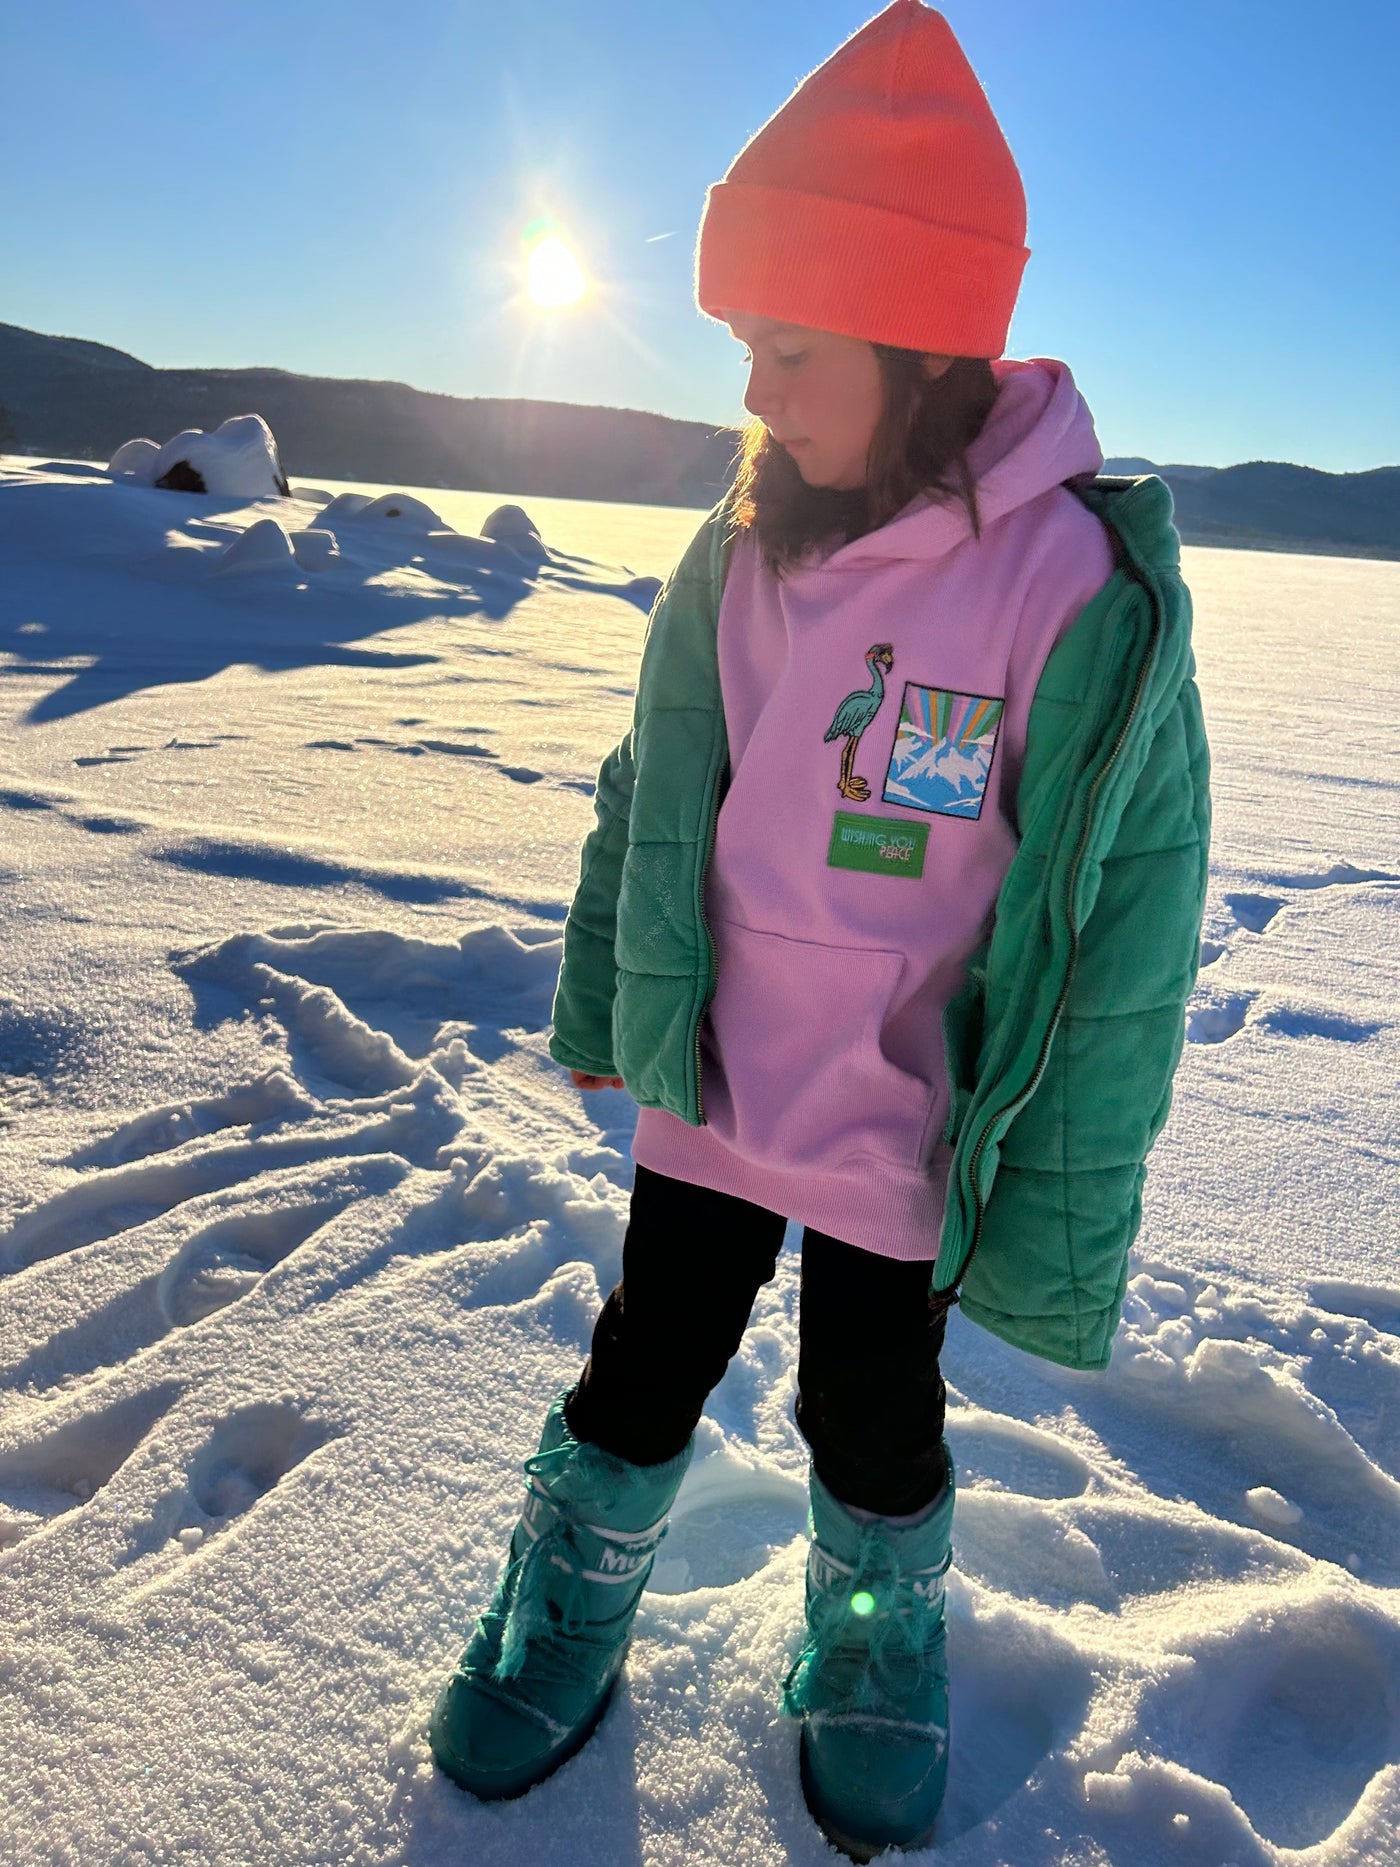 BIRDZ From the mountains to the waves Hoodie |Lilac| Kidz